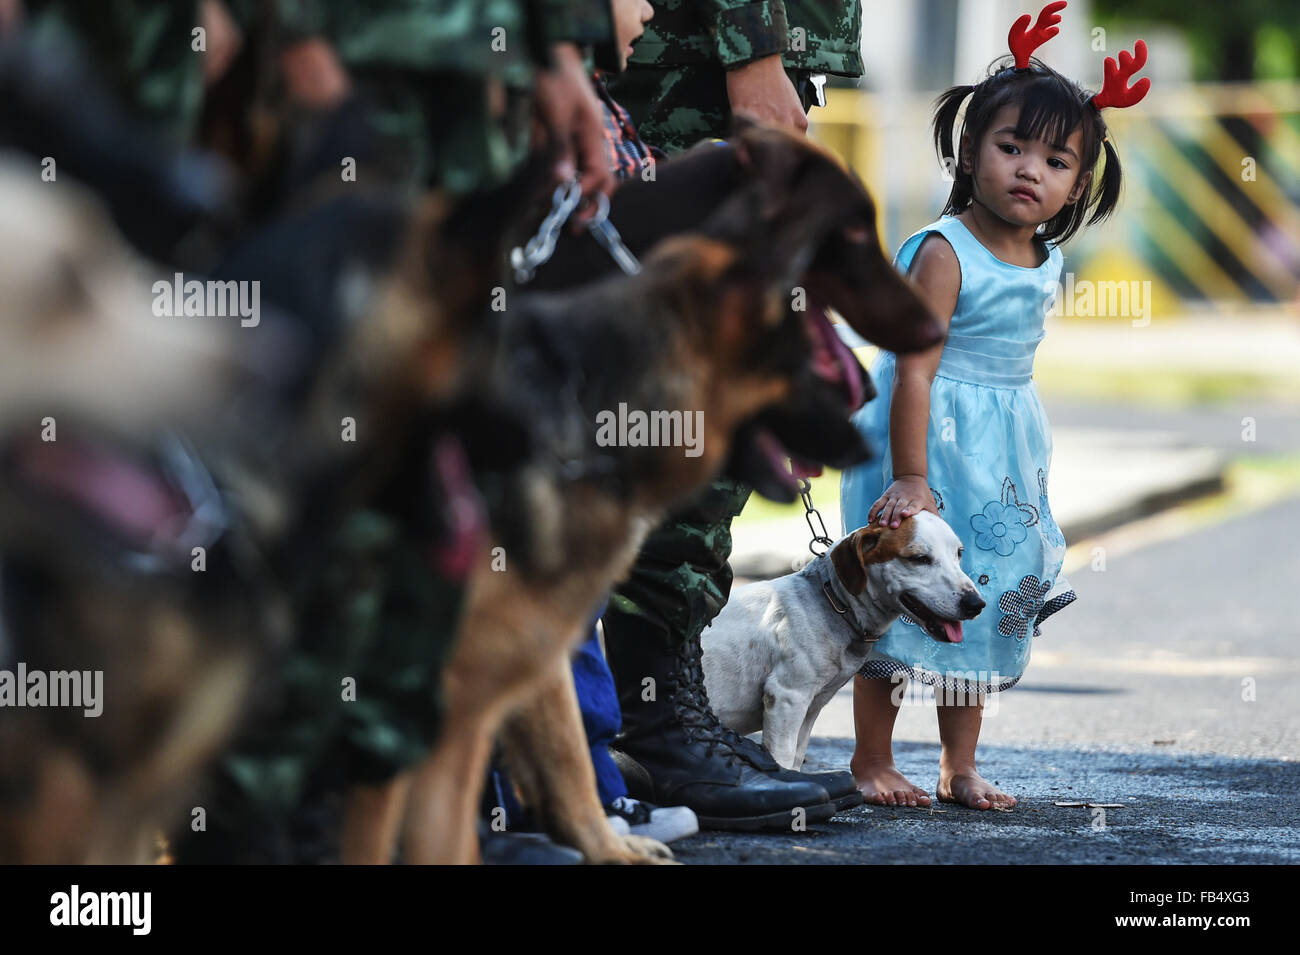 Beijing, Thailand. 9th Jan, 2016. A girl poses for photos with army dogs during a public opening event marking the Thai Children' s Day at the Royal Thai Army 2nd Cavalry Division based in the north of downtown Bangkok, Thailand, Jan. 9, 2016. Thailand opened a number of its military bases to the public while the Thai Children' s Day is observed on the second Saturday in January. © Li Mangmang/Xinhua/Alamy Live News Stock Photo